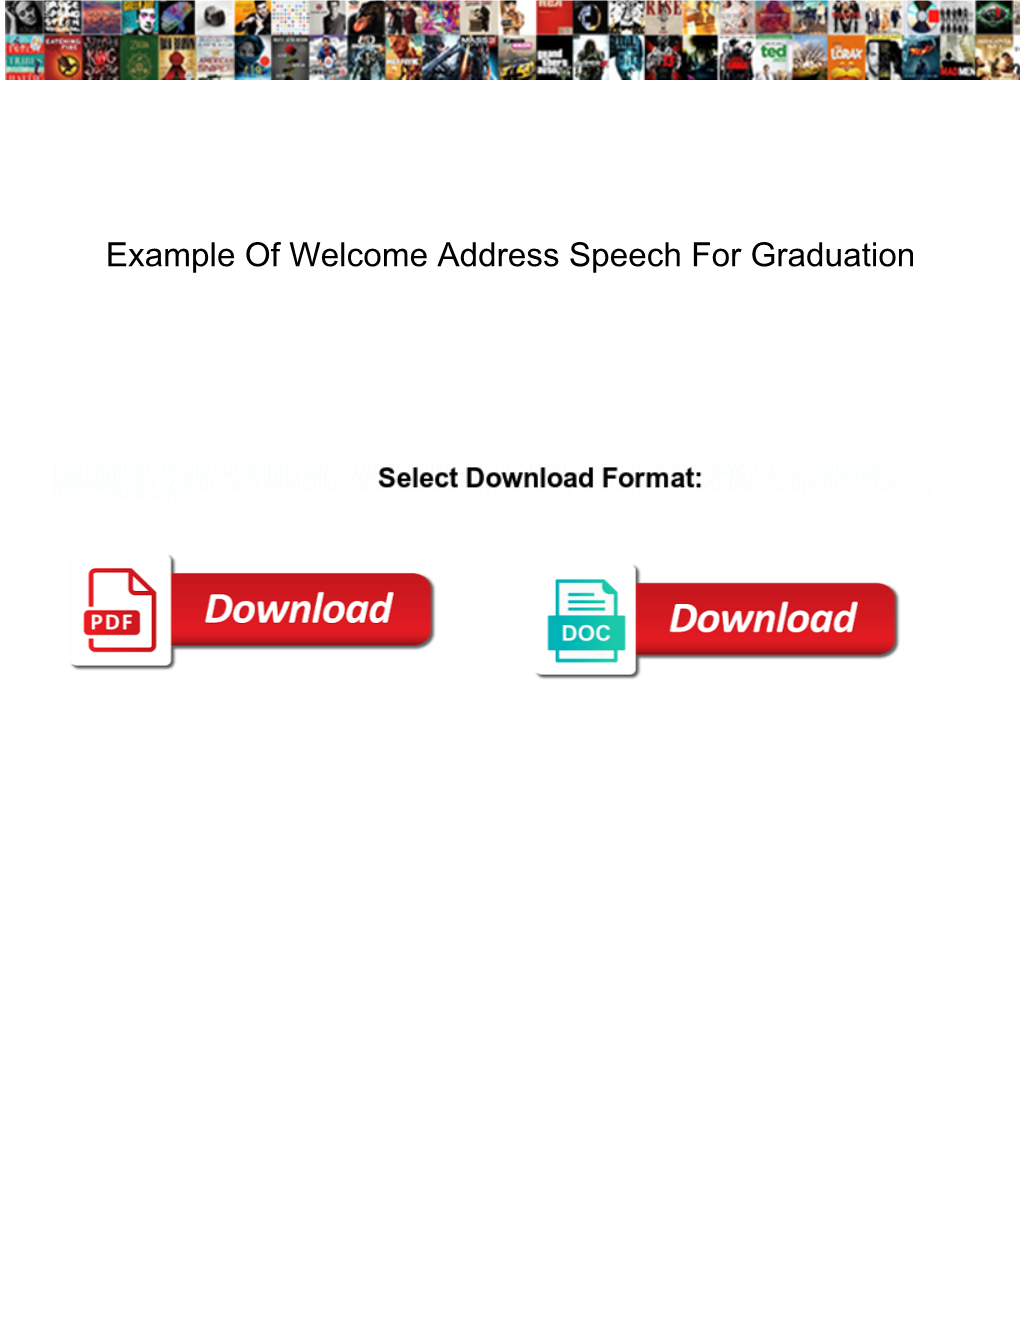 Example of Welcome Address Speech for Graduation